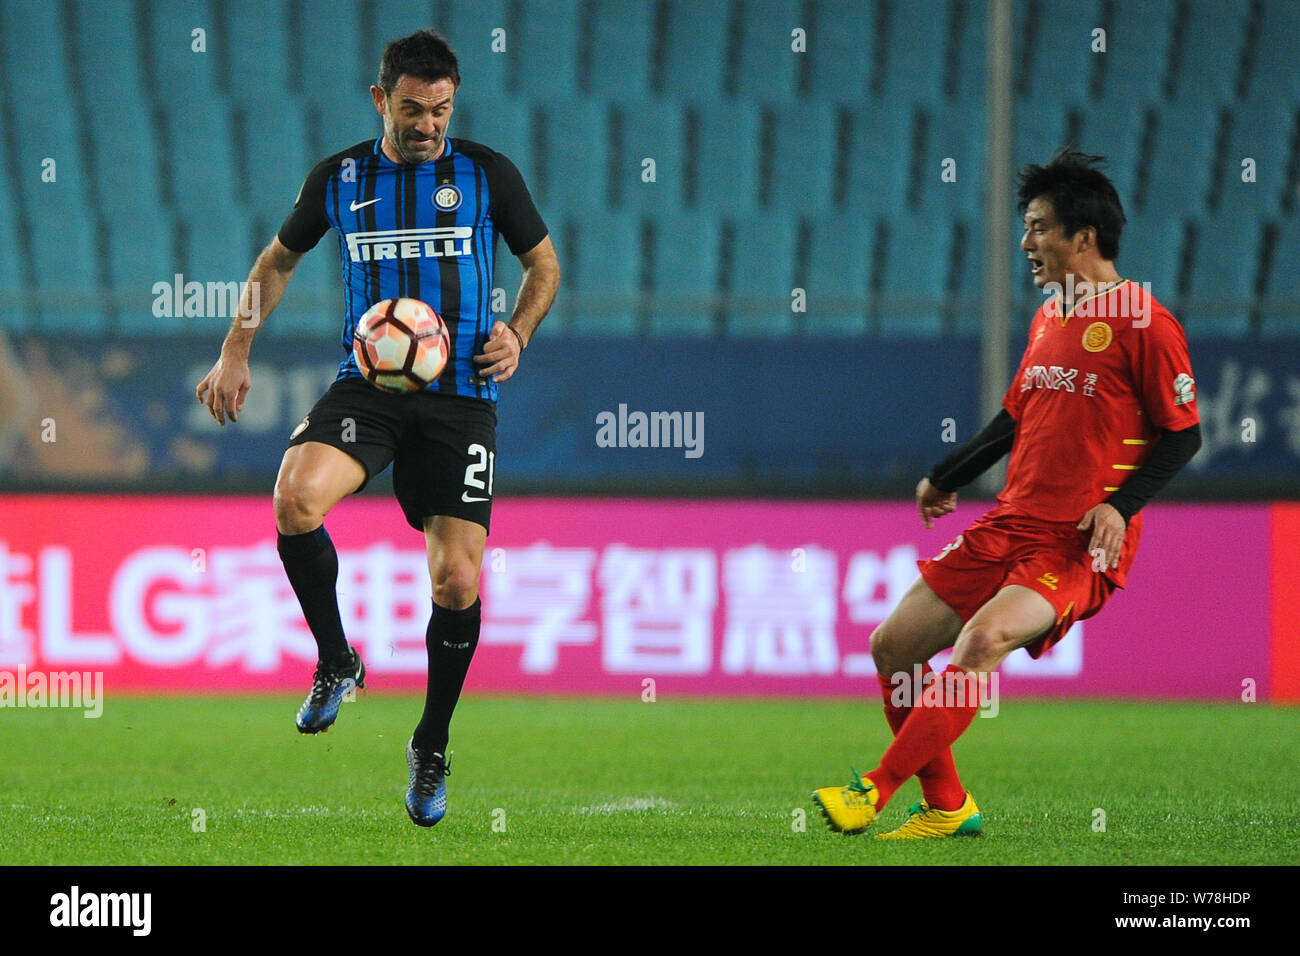 Former Greek football player Georgios Karagounis, left, of Inter Forever kicks the ball to make a pass against a player of Chinese All Star Legends Te Stock Photo